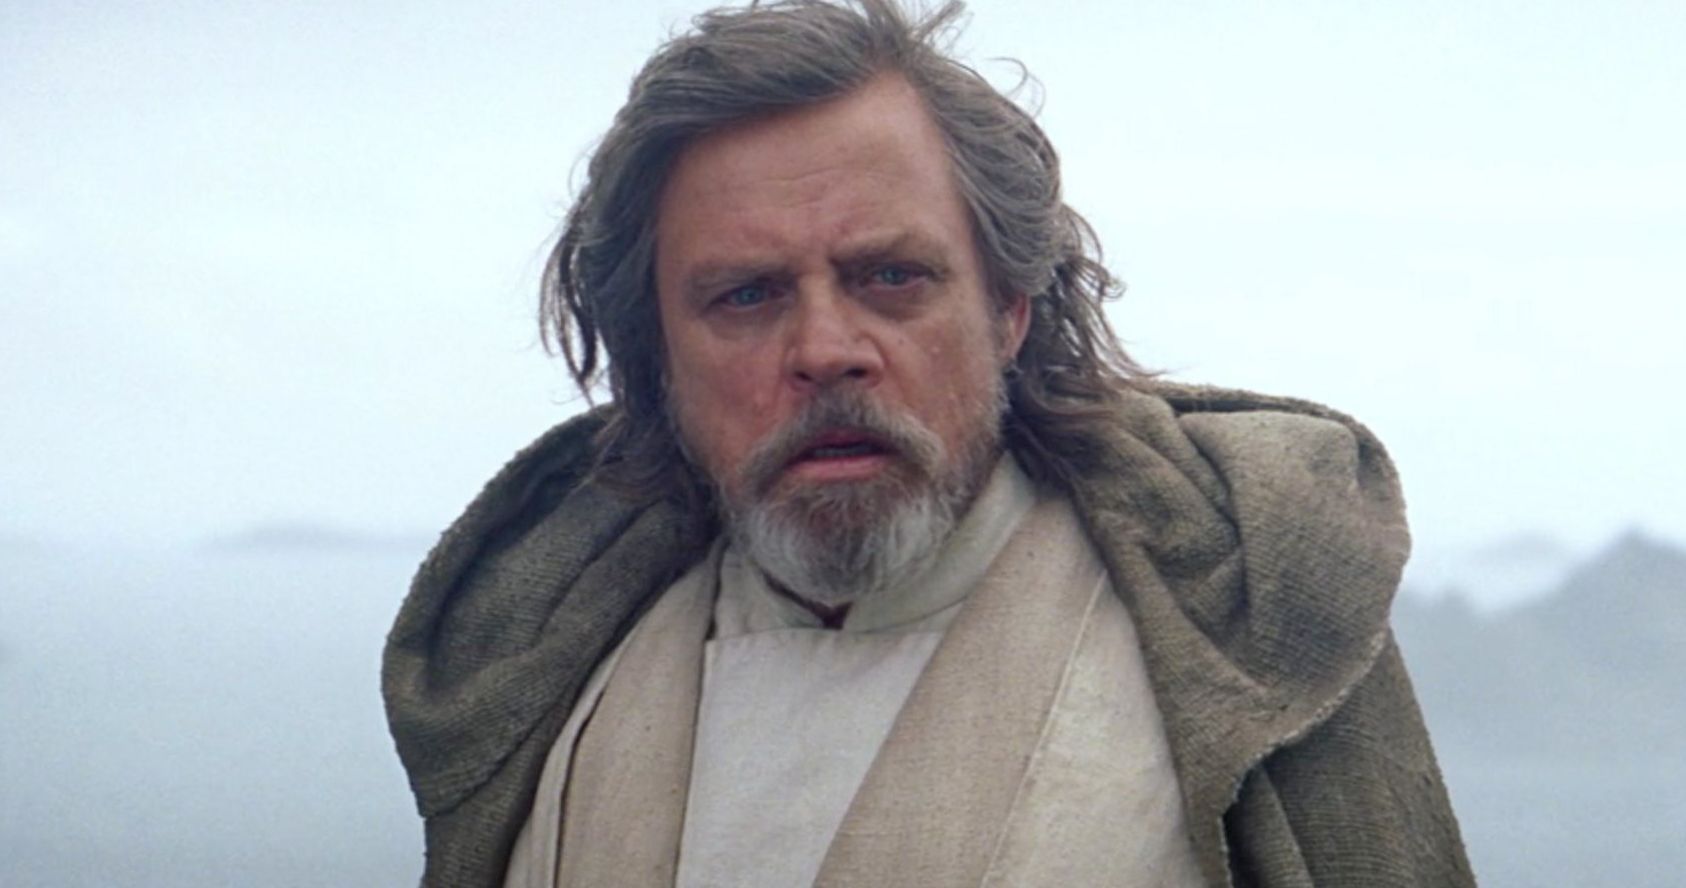 Mark Hamill Says Meeting Terminally Ill Children Is a Responsibility He Doesn't Take Lightly